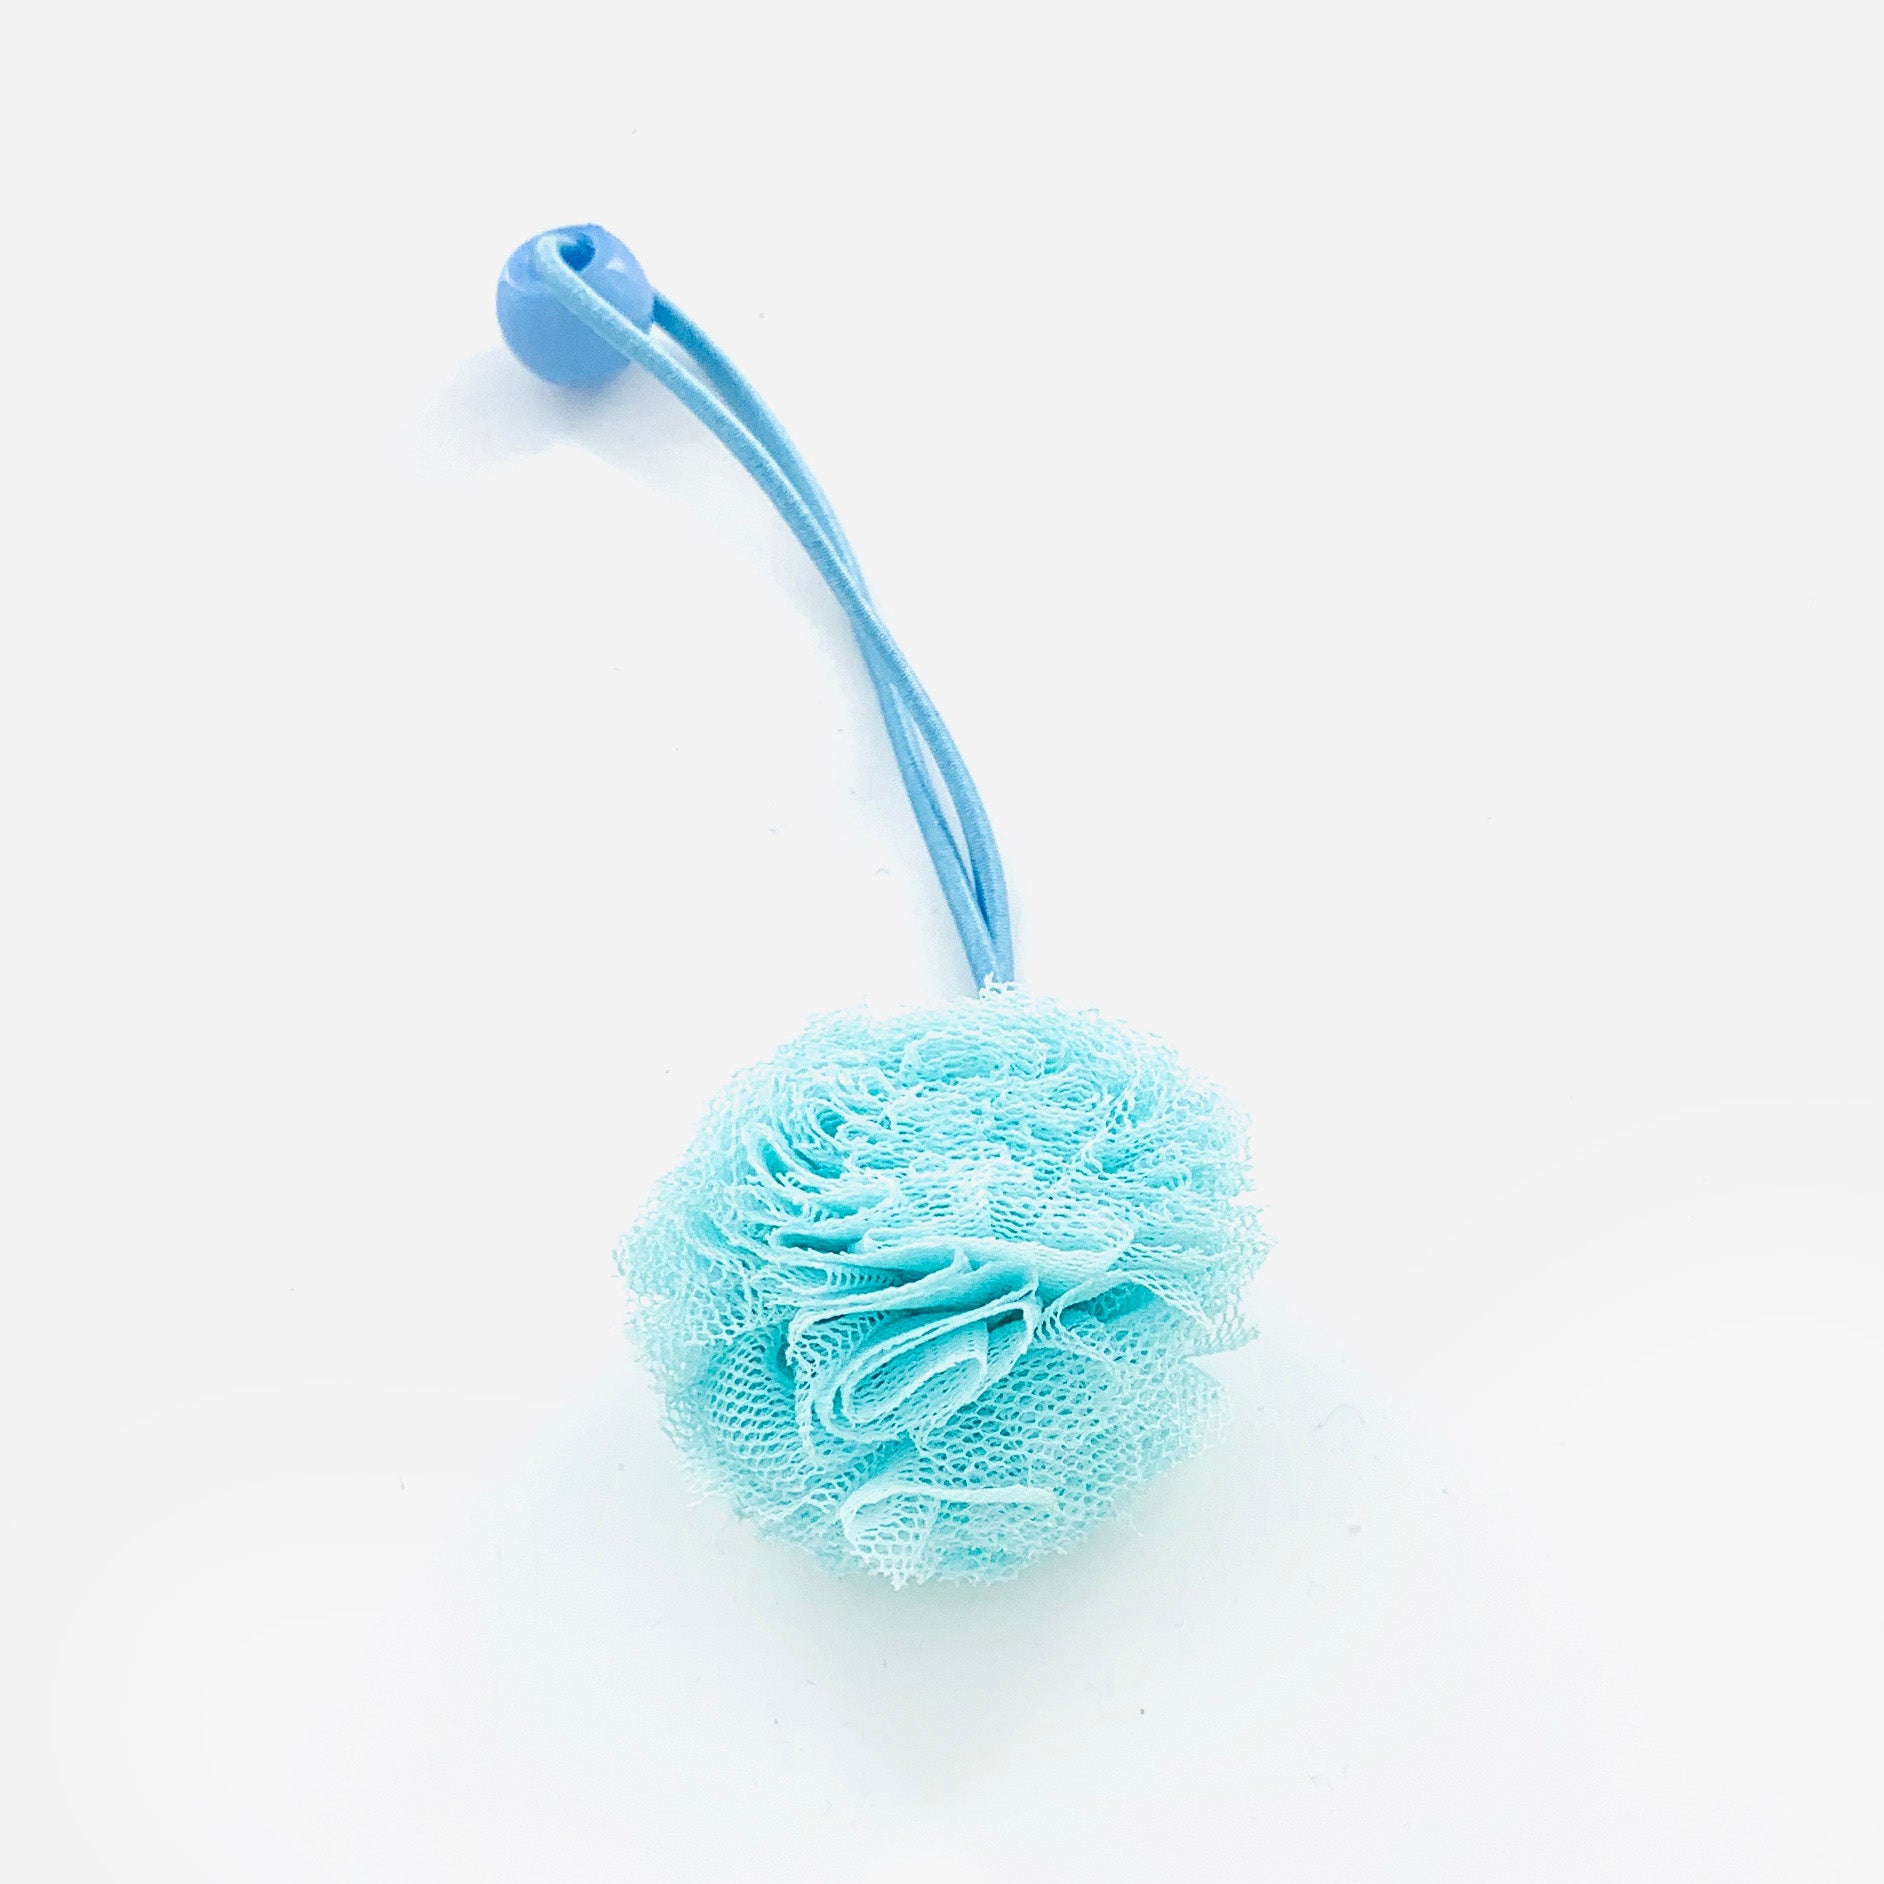 Turquoise rubber band with fluffy fabric pom pom